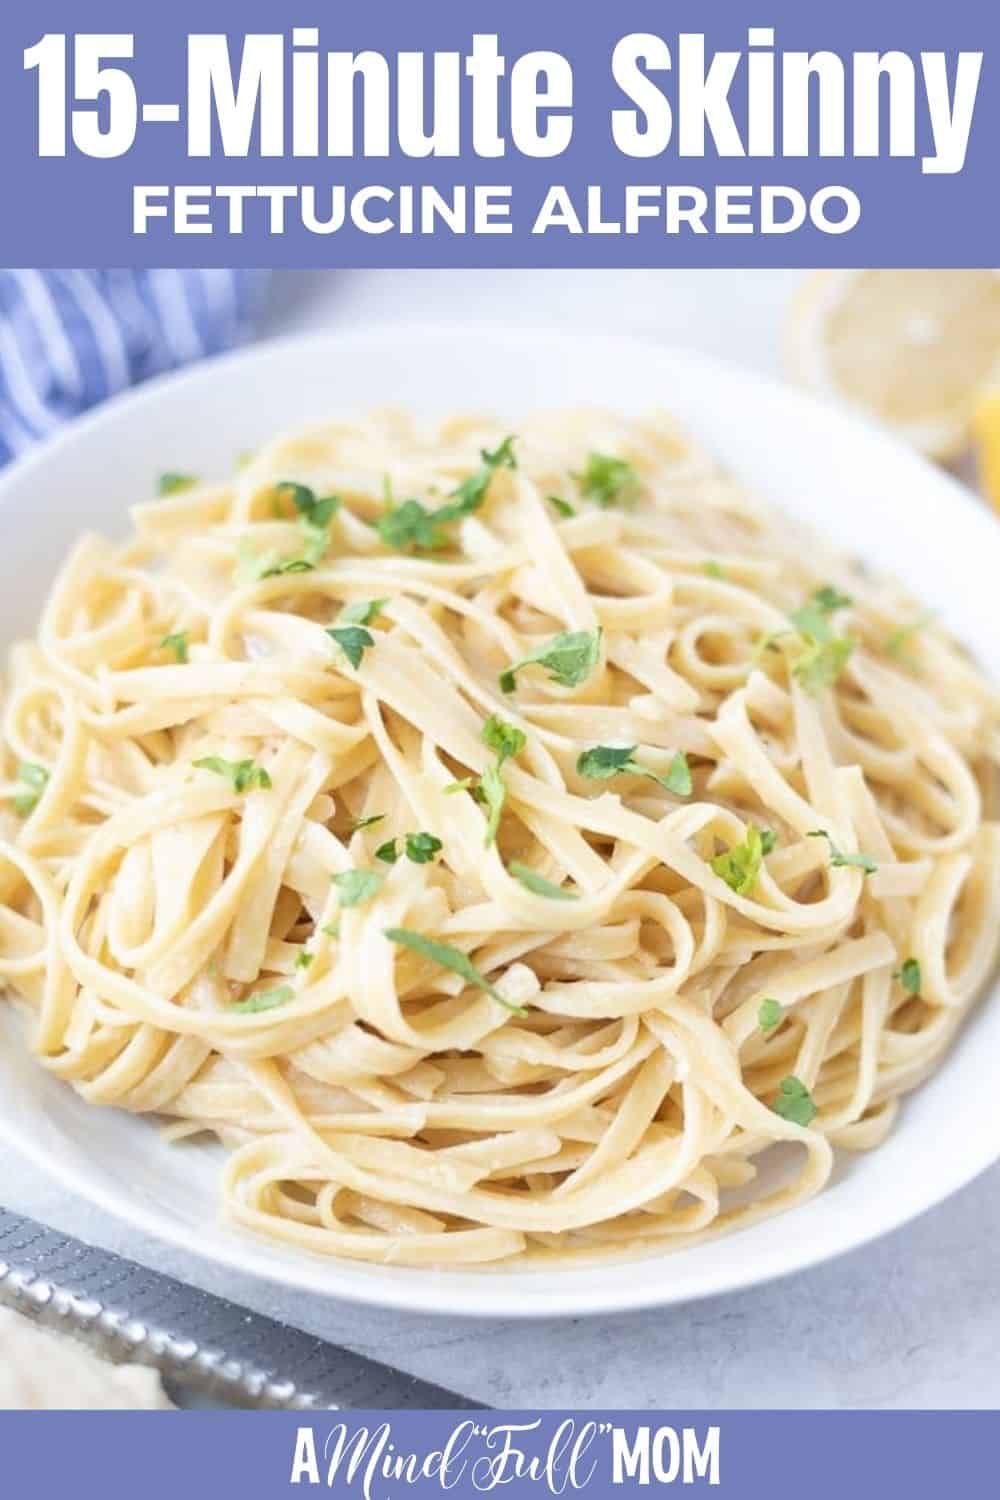 Easy and Quick Fettuccine Alfredo that takes just 15 minutes to make and uses only ONE PAN! This family favorite recipe includes fettuccine, and a delicious lightened up Alfredo sauce.  It is  sure to become a go-to dinner idea!